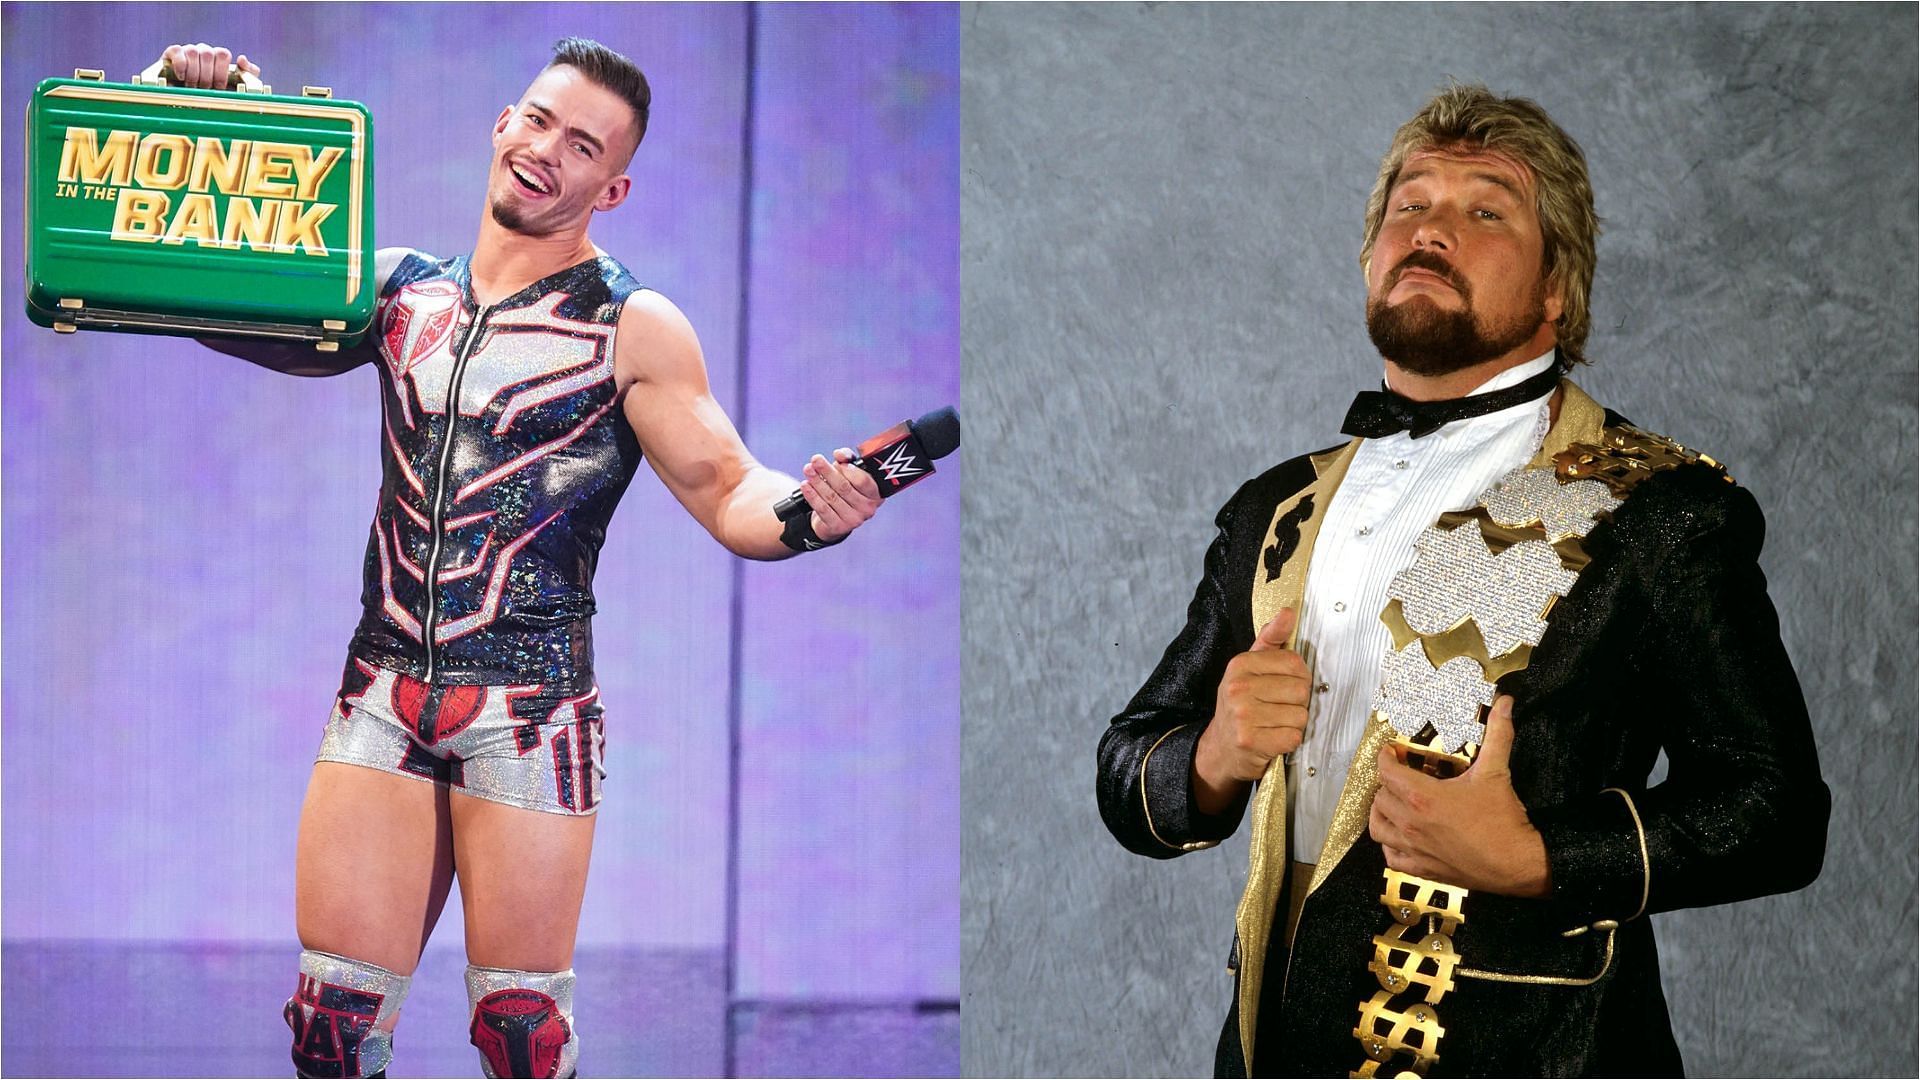 Theory and DiBiase could form a million-dollar alliance